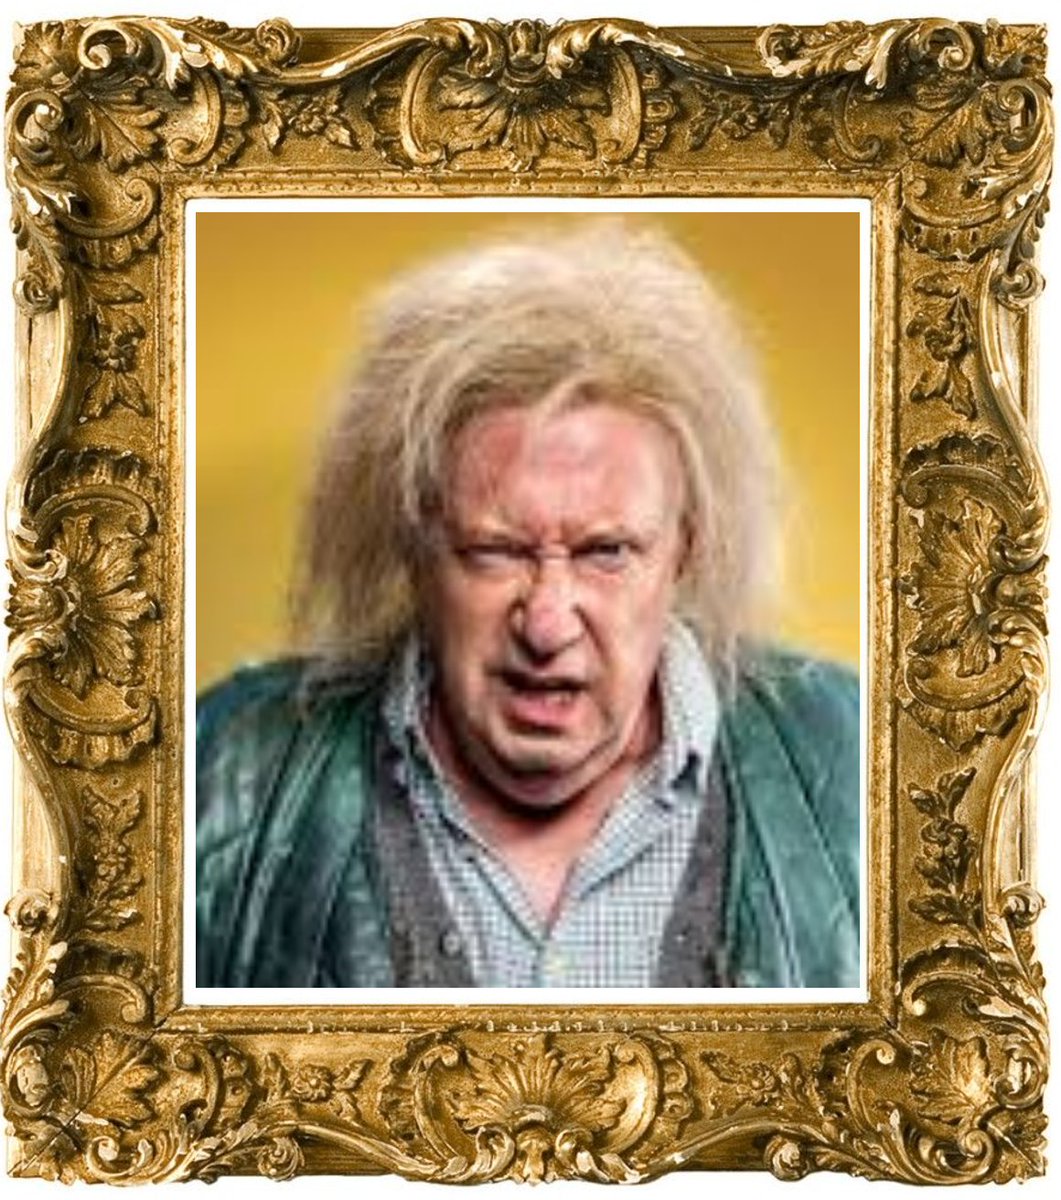 Boris Johnson is guest of honour at The Carlton Club tonight to unveil a portrait of himself. Guest of 'honour' FFS. #ToriesNoShame #ToriesDestroyingOurCountry #ToriesOut #JohnsonNeverAgain